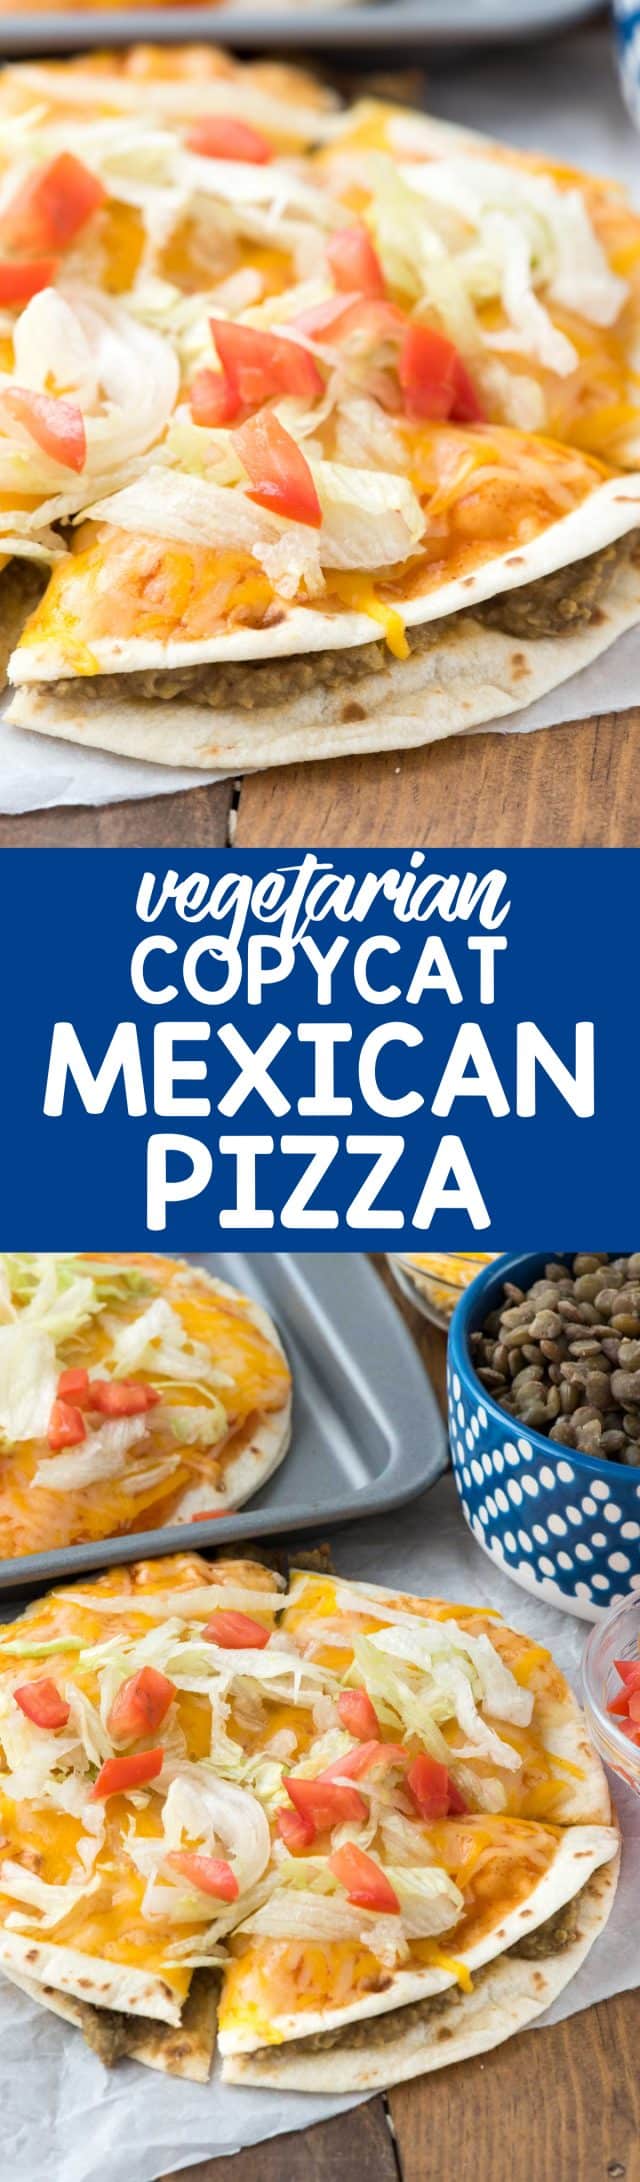 Copycat Mexican Pizza - just like from the fast food place but it's healthier and vegetarian and you can make it at home!